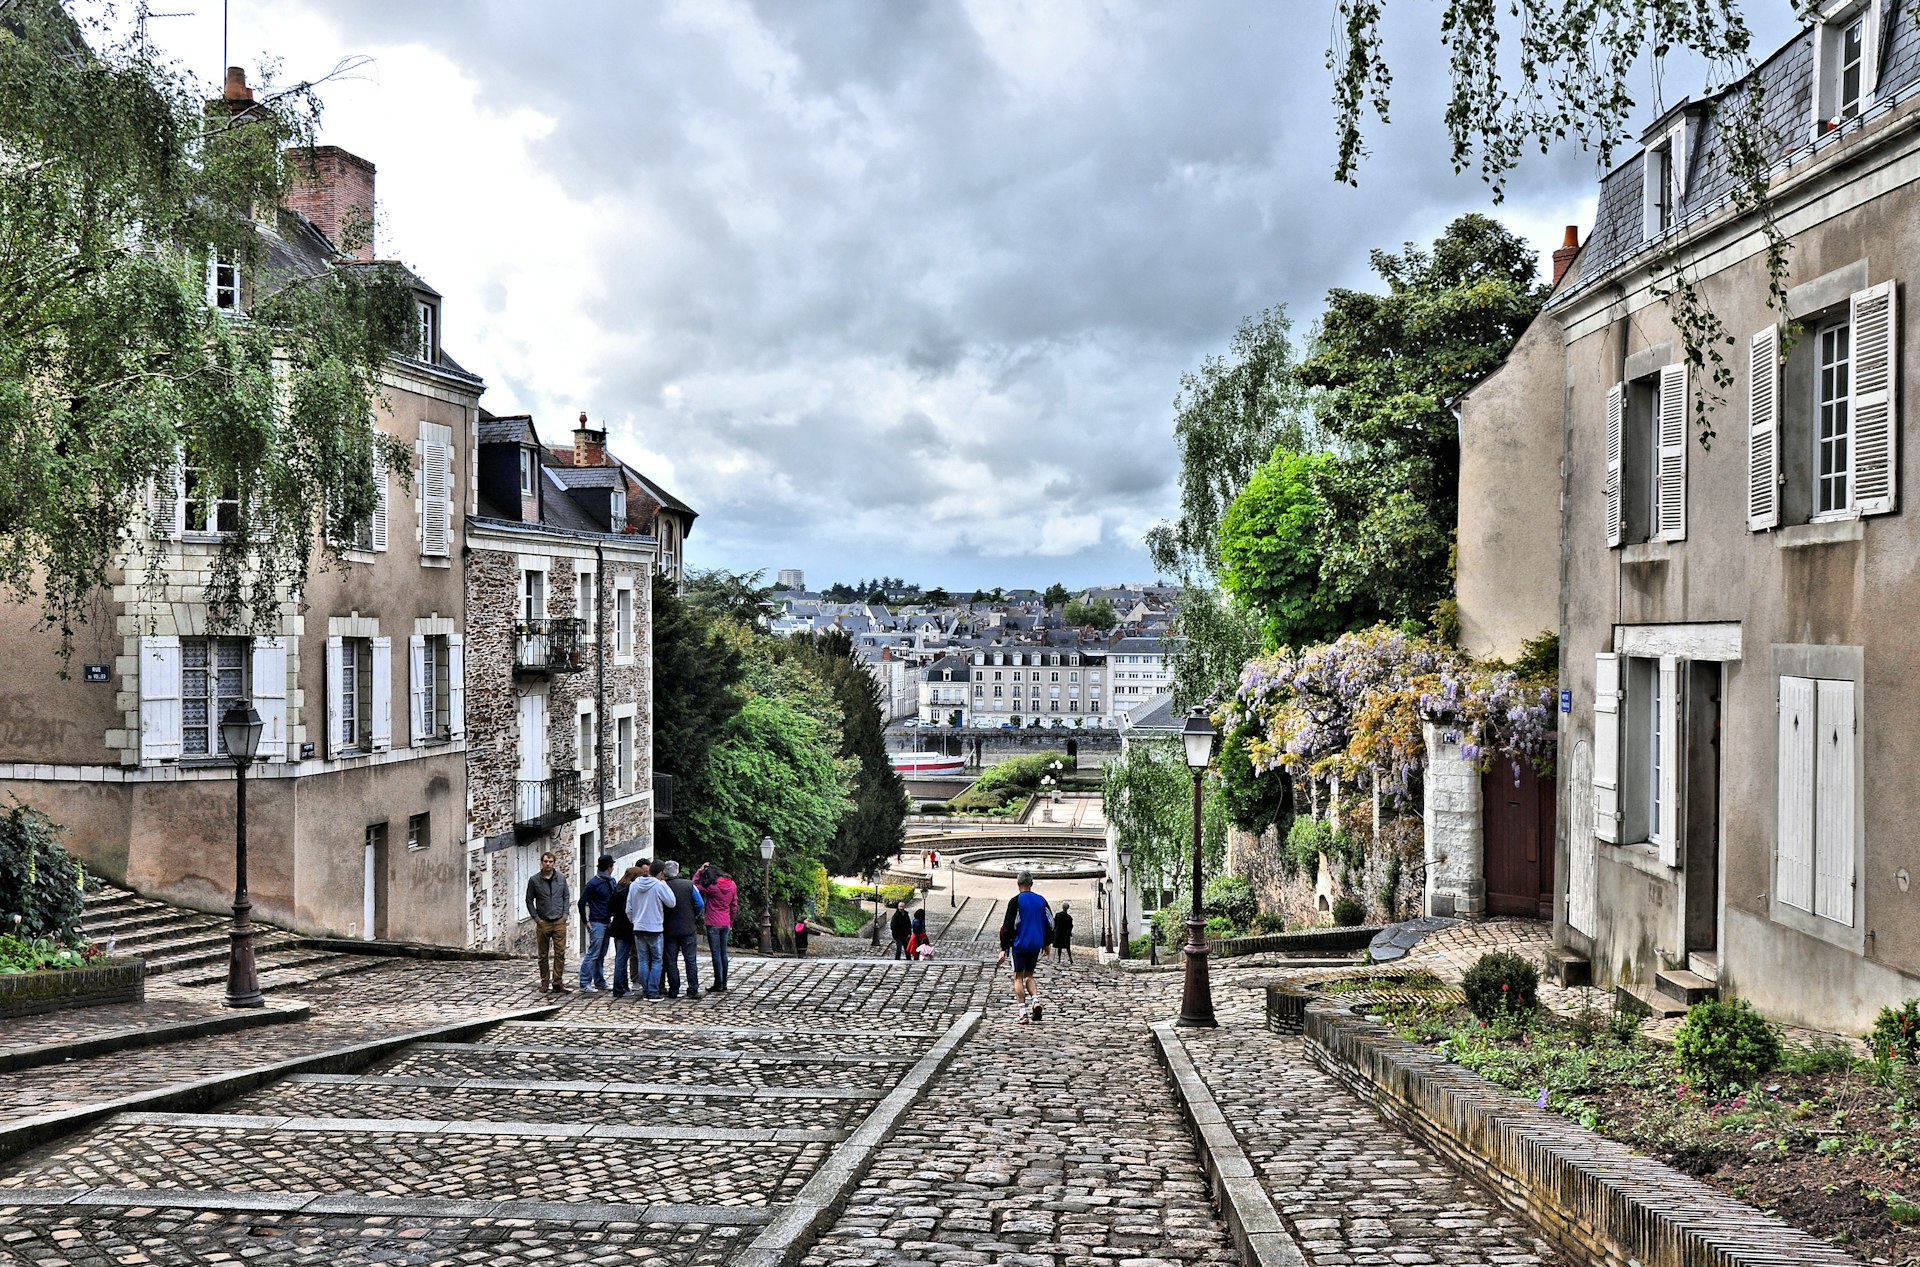 Tourists wander the quaint cobbled streets of a historic city